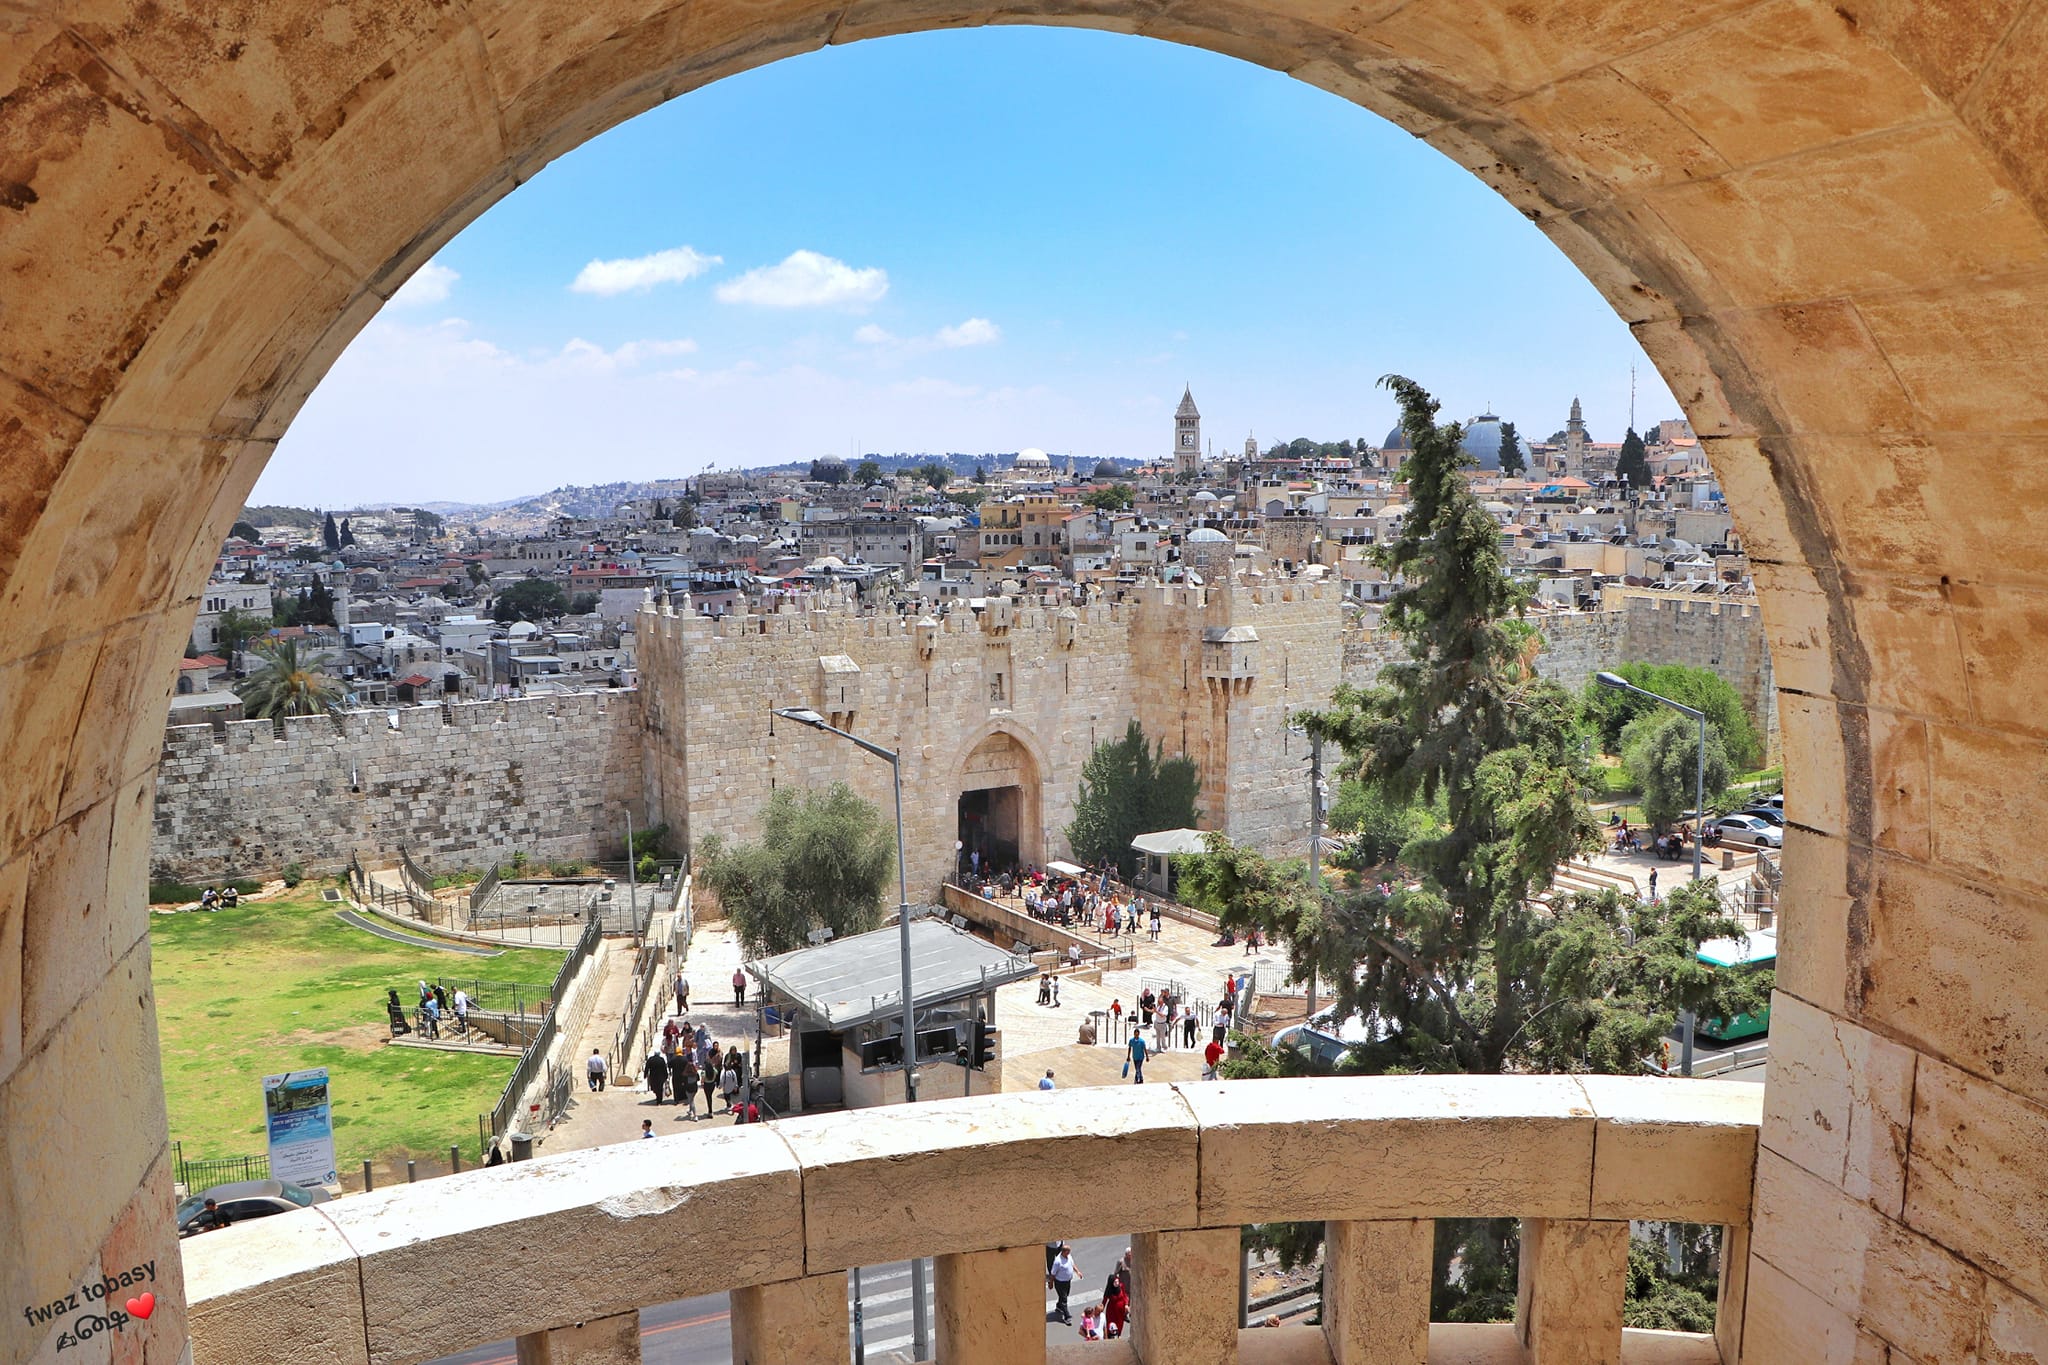 walking in the footsteps of jesus tour